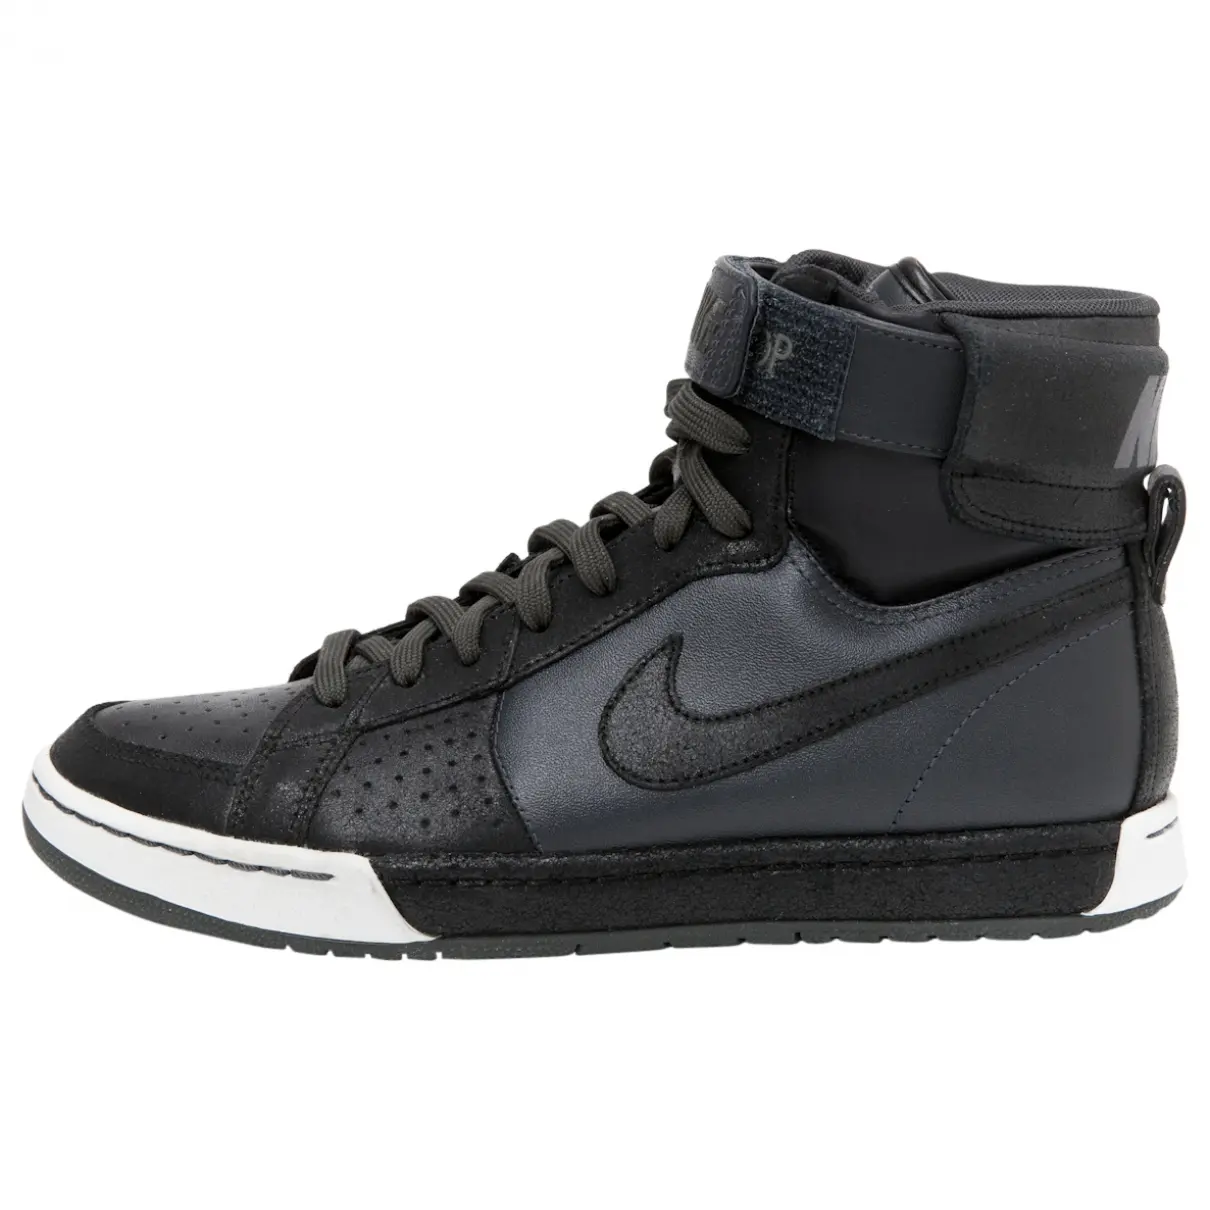 Black Leather Trainers Nike